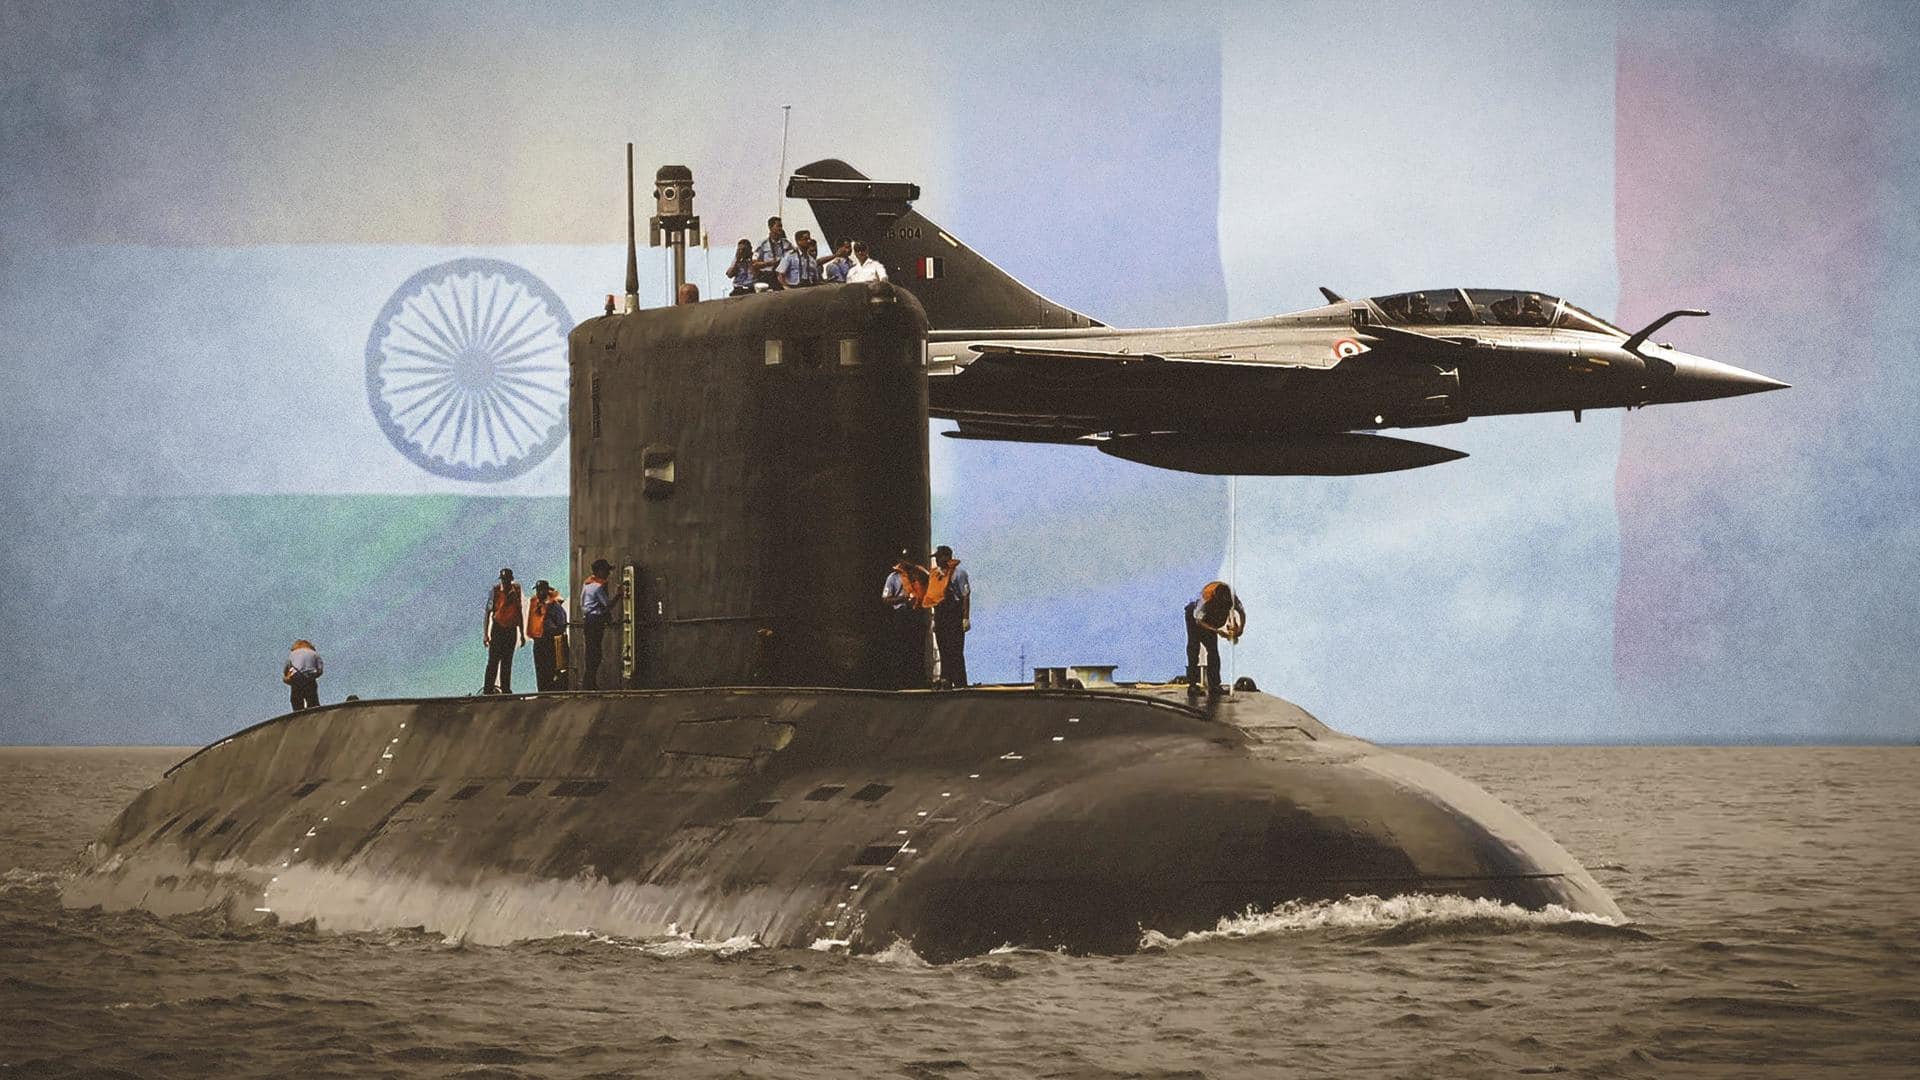 Rafale-M, Scorpene submarine deals missing from updated India-France document 